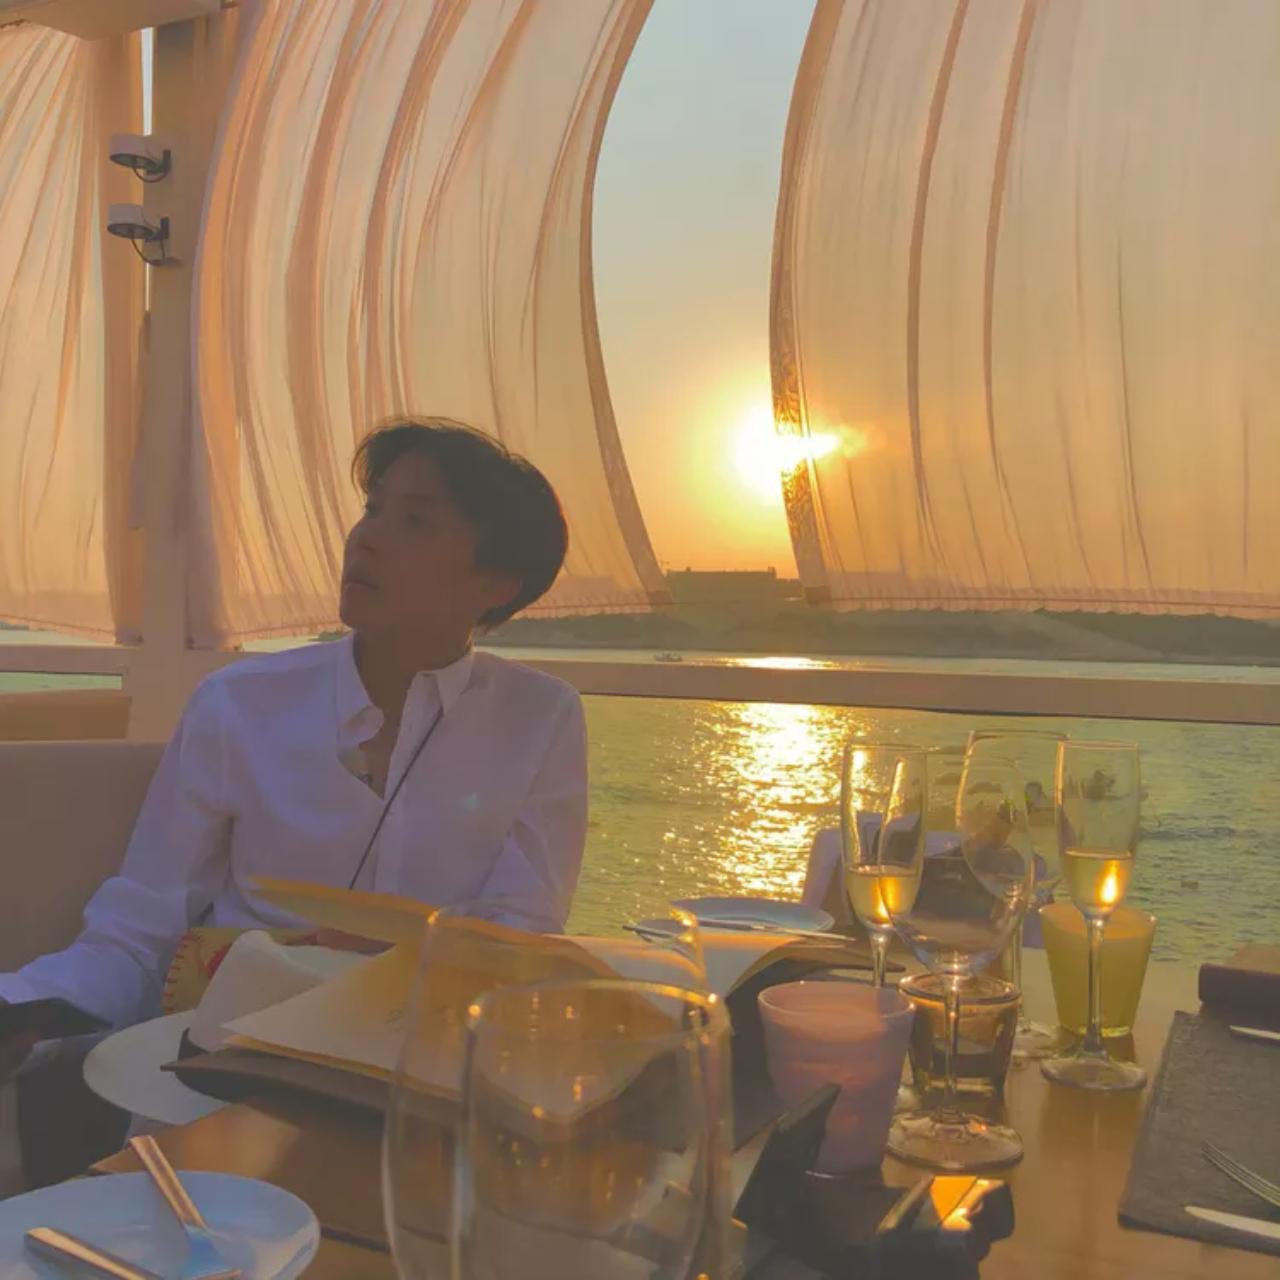 Although ARMYs love seeing J-Hope's flamboyant fashion choices, the artist definitely looks like boyfriend material in his casual fits as well. Take a look at him in this simple white shirt - wouldn't you want to be on this yacht with him watching the sunset?